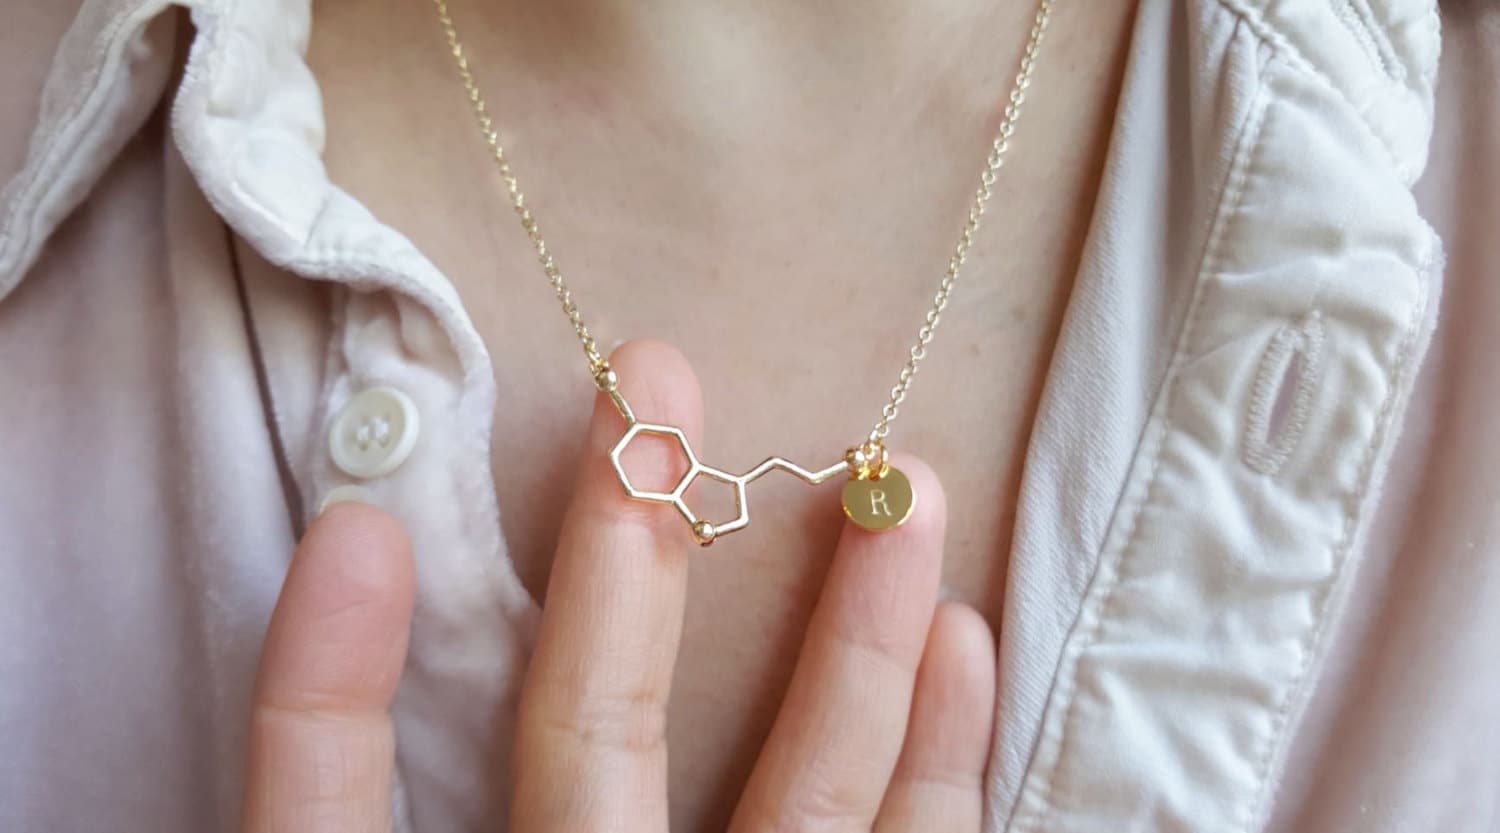 Stainless Steel Chemical Compound Necklaces, coffee, serotonin, dopamine  pendant | eBay